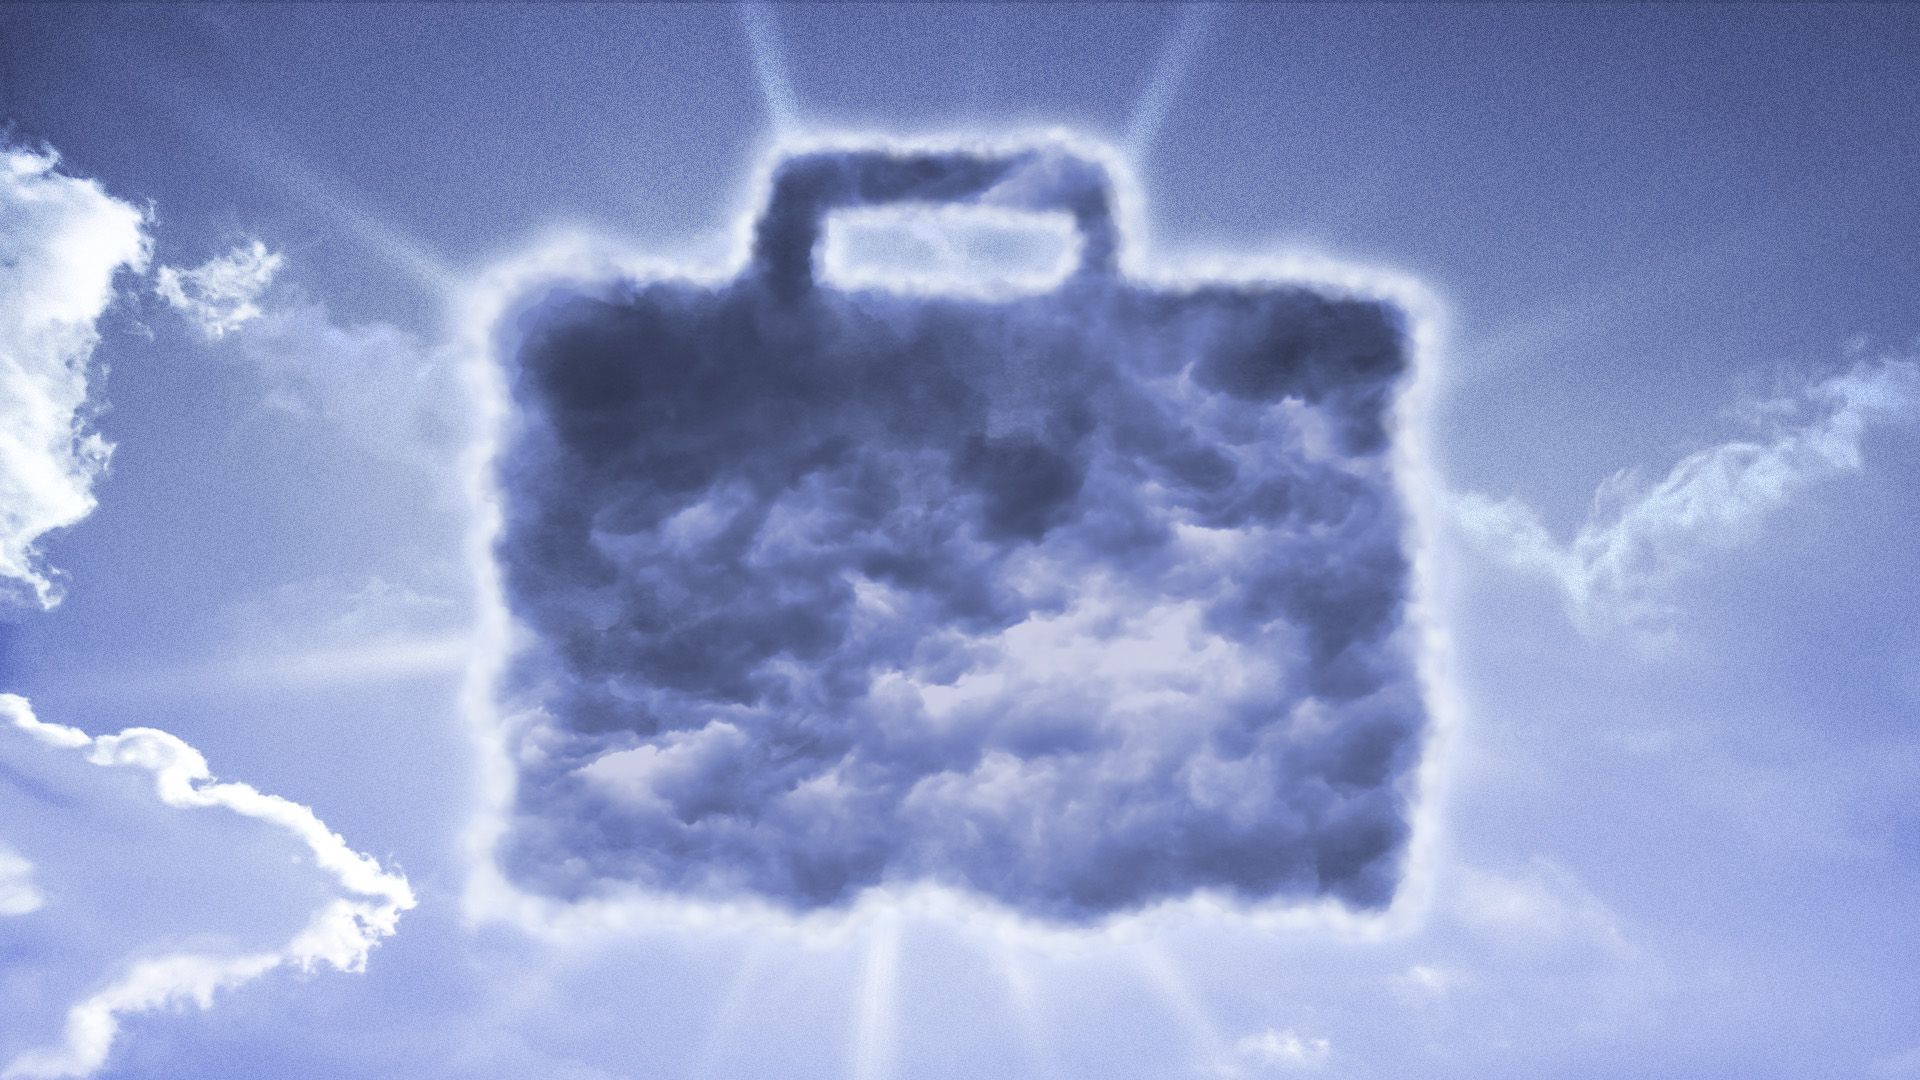 Illustration of a briefcase-shaped storm cloud with a silver lining